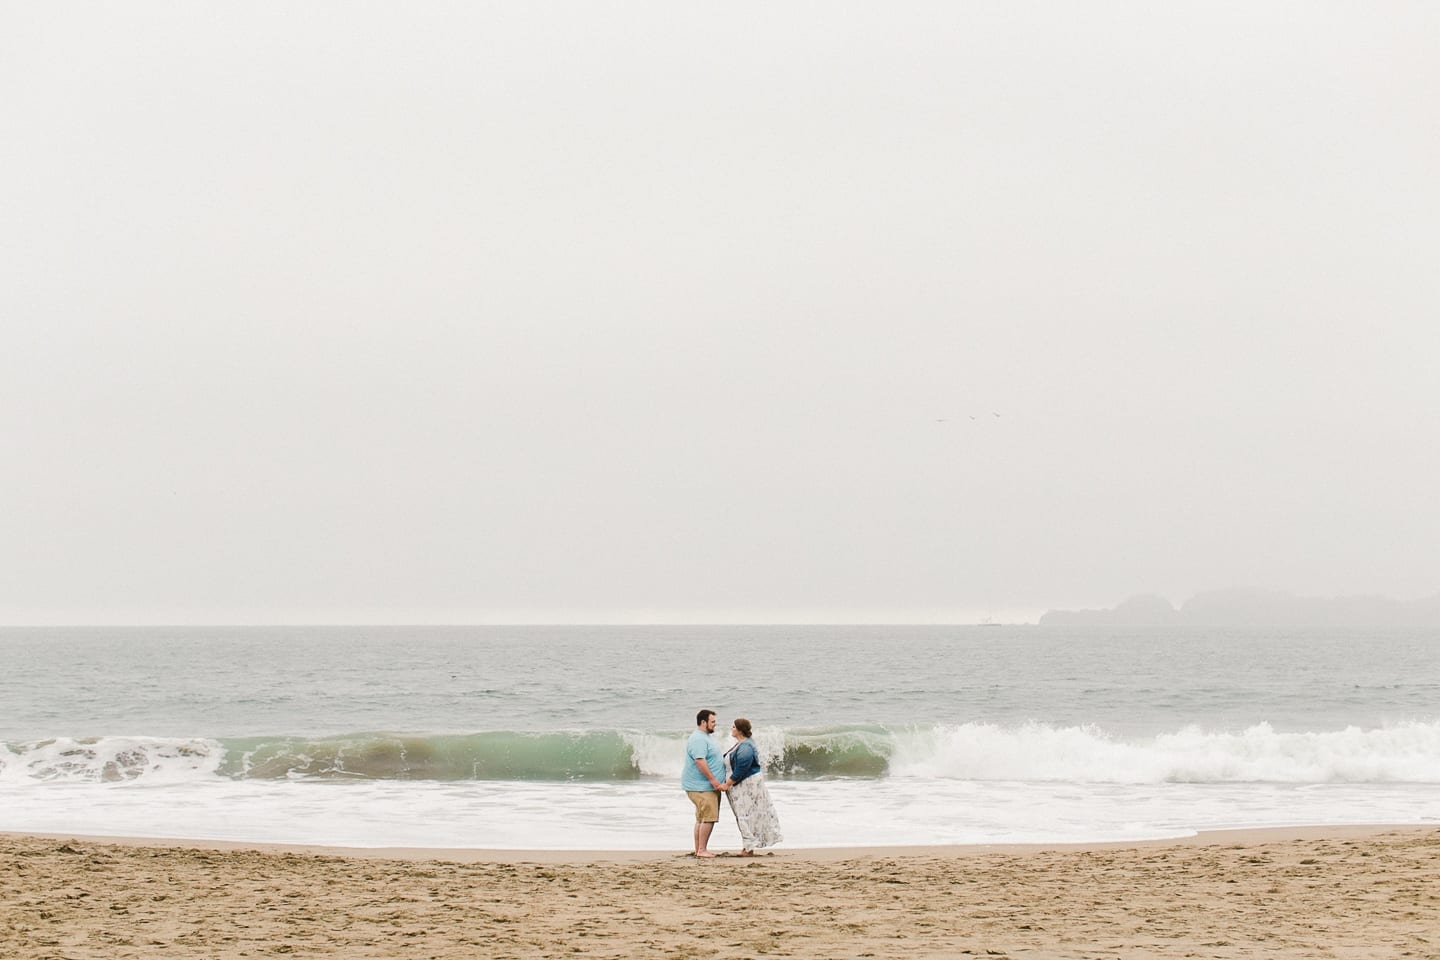 palace_of_fine_arts_bakers_beach_engagement_016.jpg